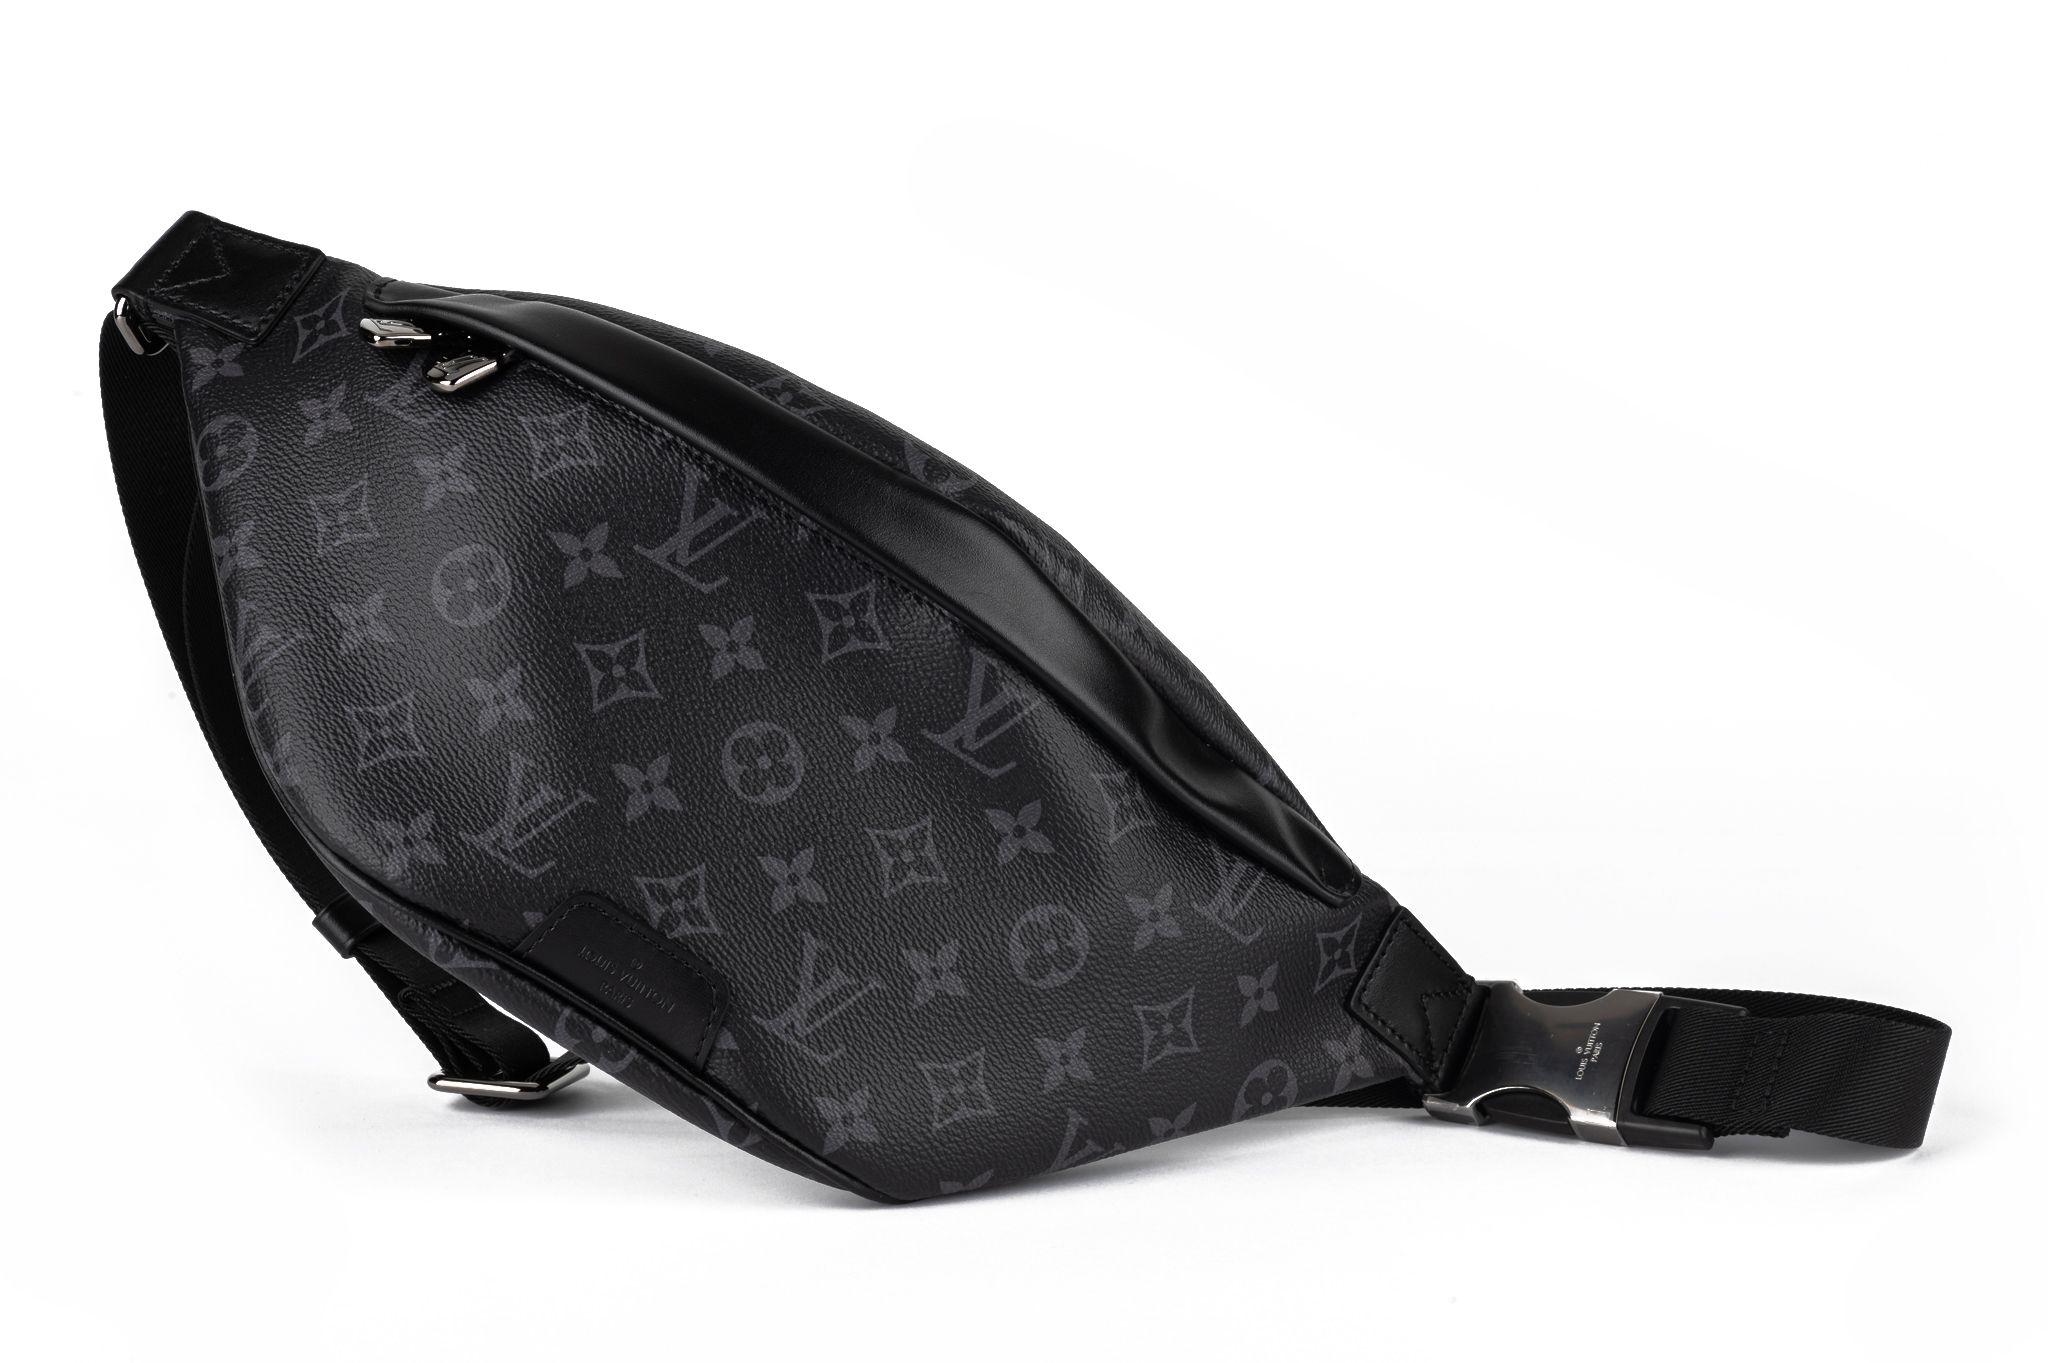 Brand new Louis Vuitton DISCOVERY BUMBAG - Gorgeous Grey